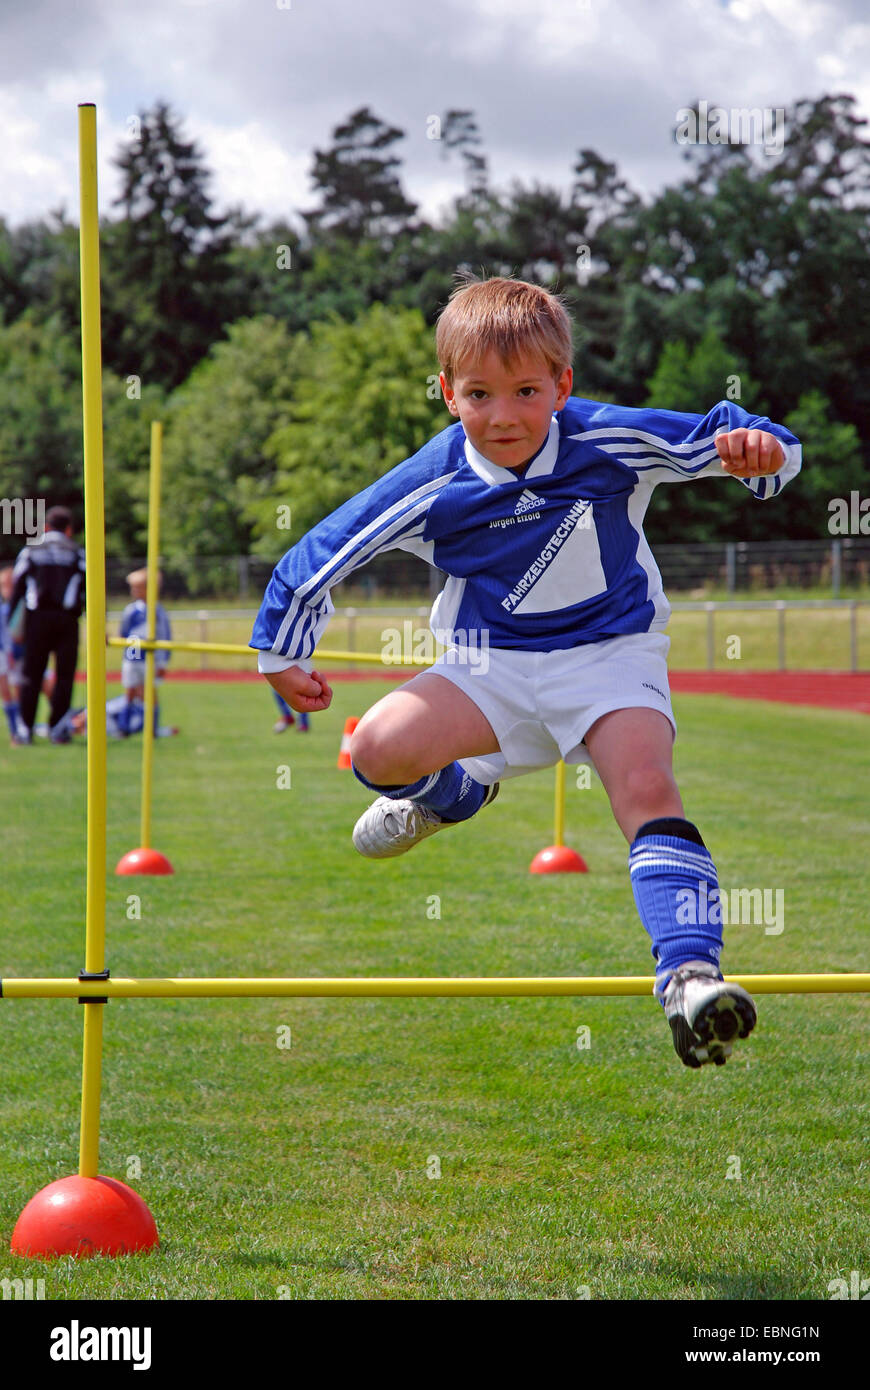 steeplechase at a juvenile football tournament, Germany, Baden-Wuerttemberg Stock Photo